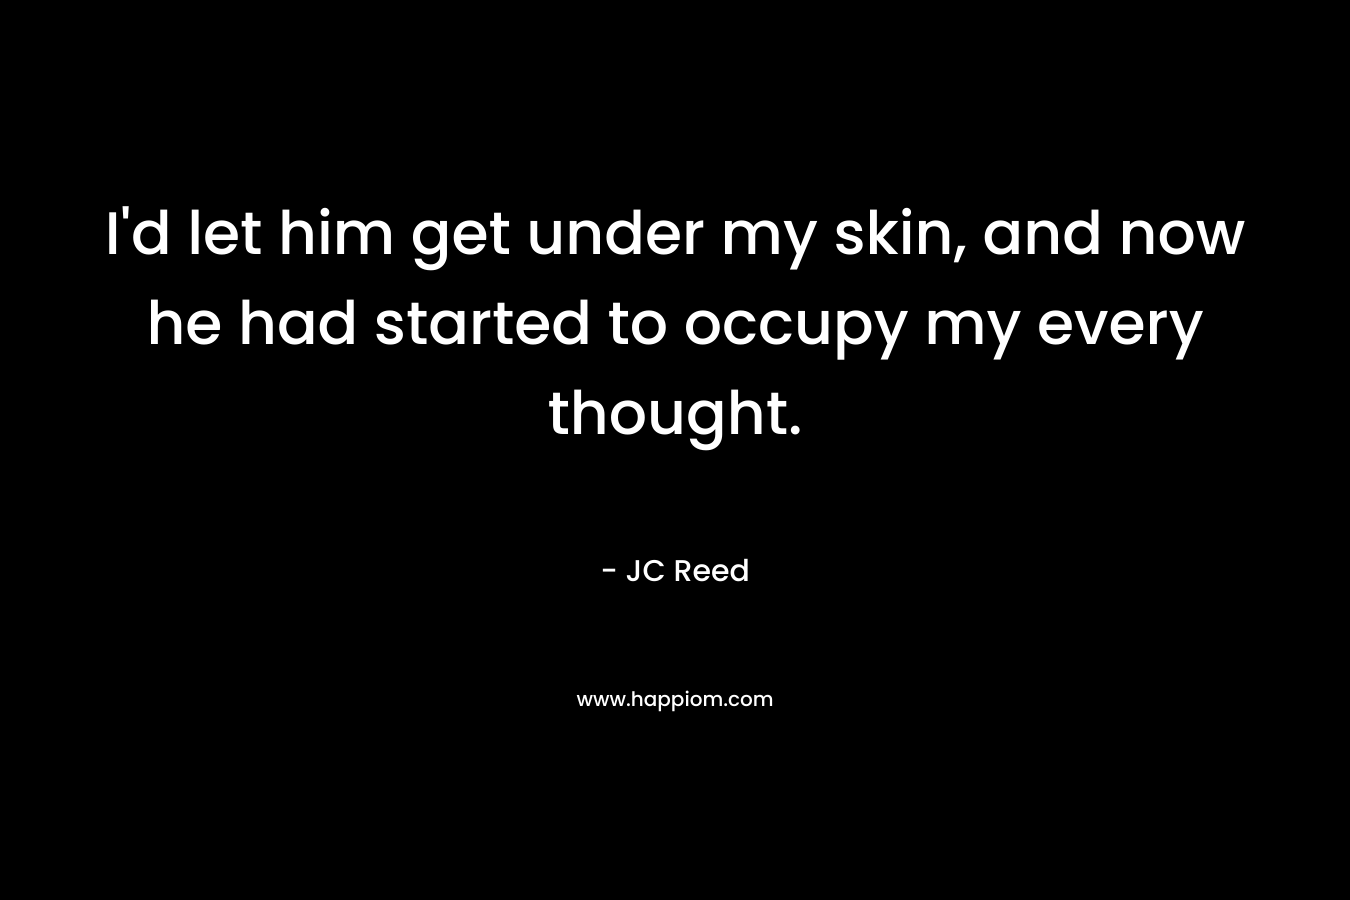 I’d let him get under my skin, and now he had started to occupy my every thought. – JC Reed